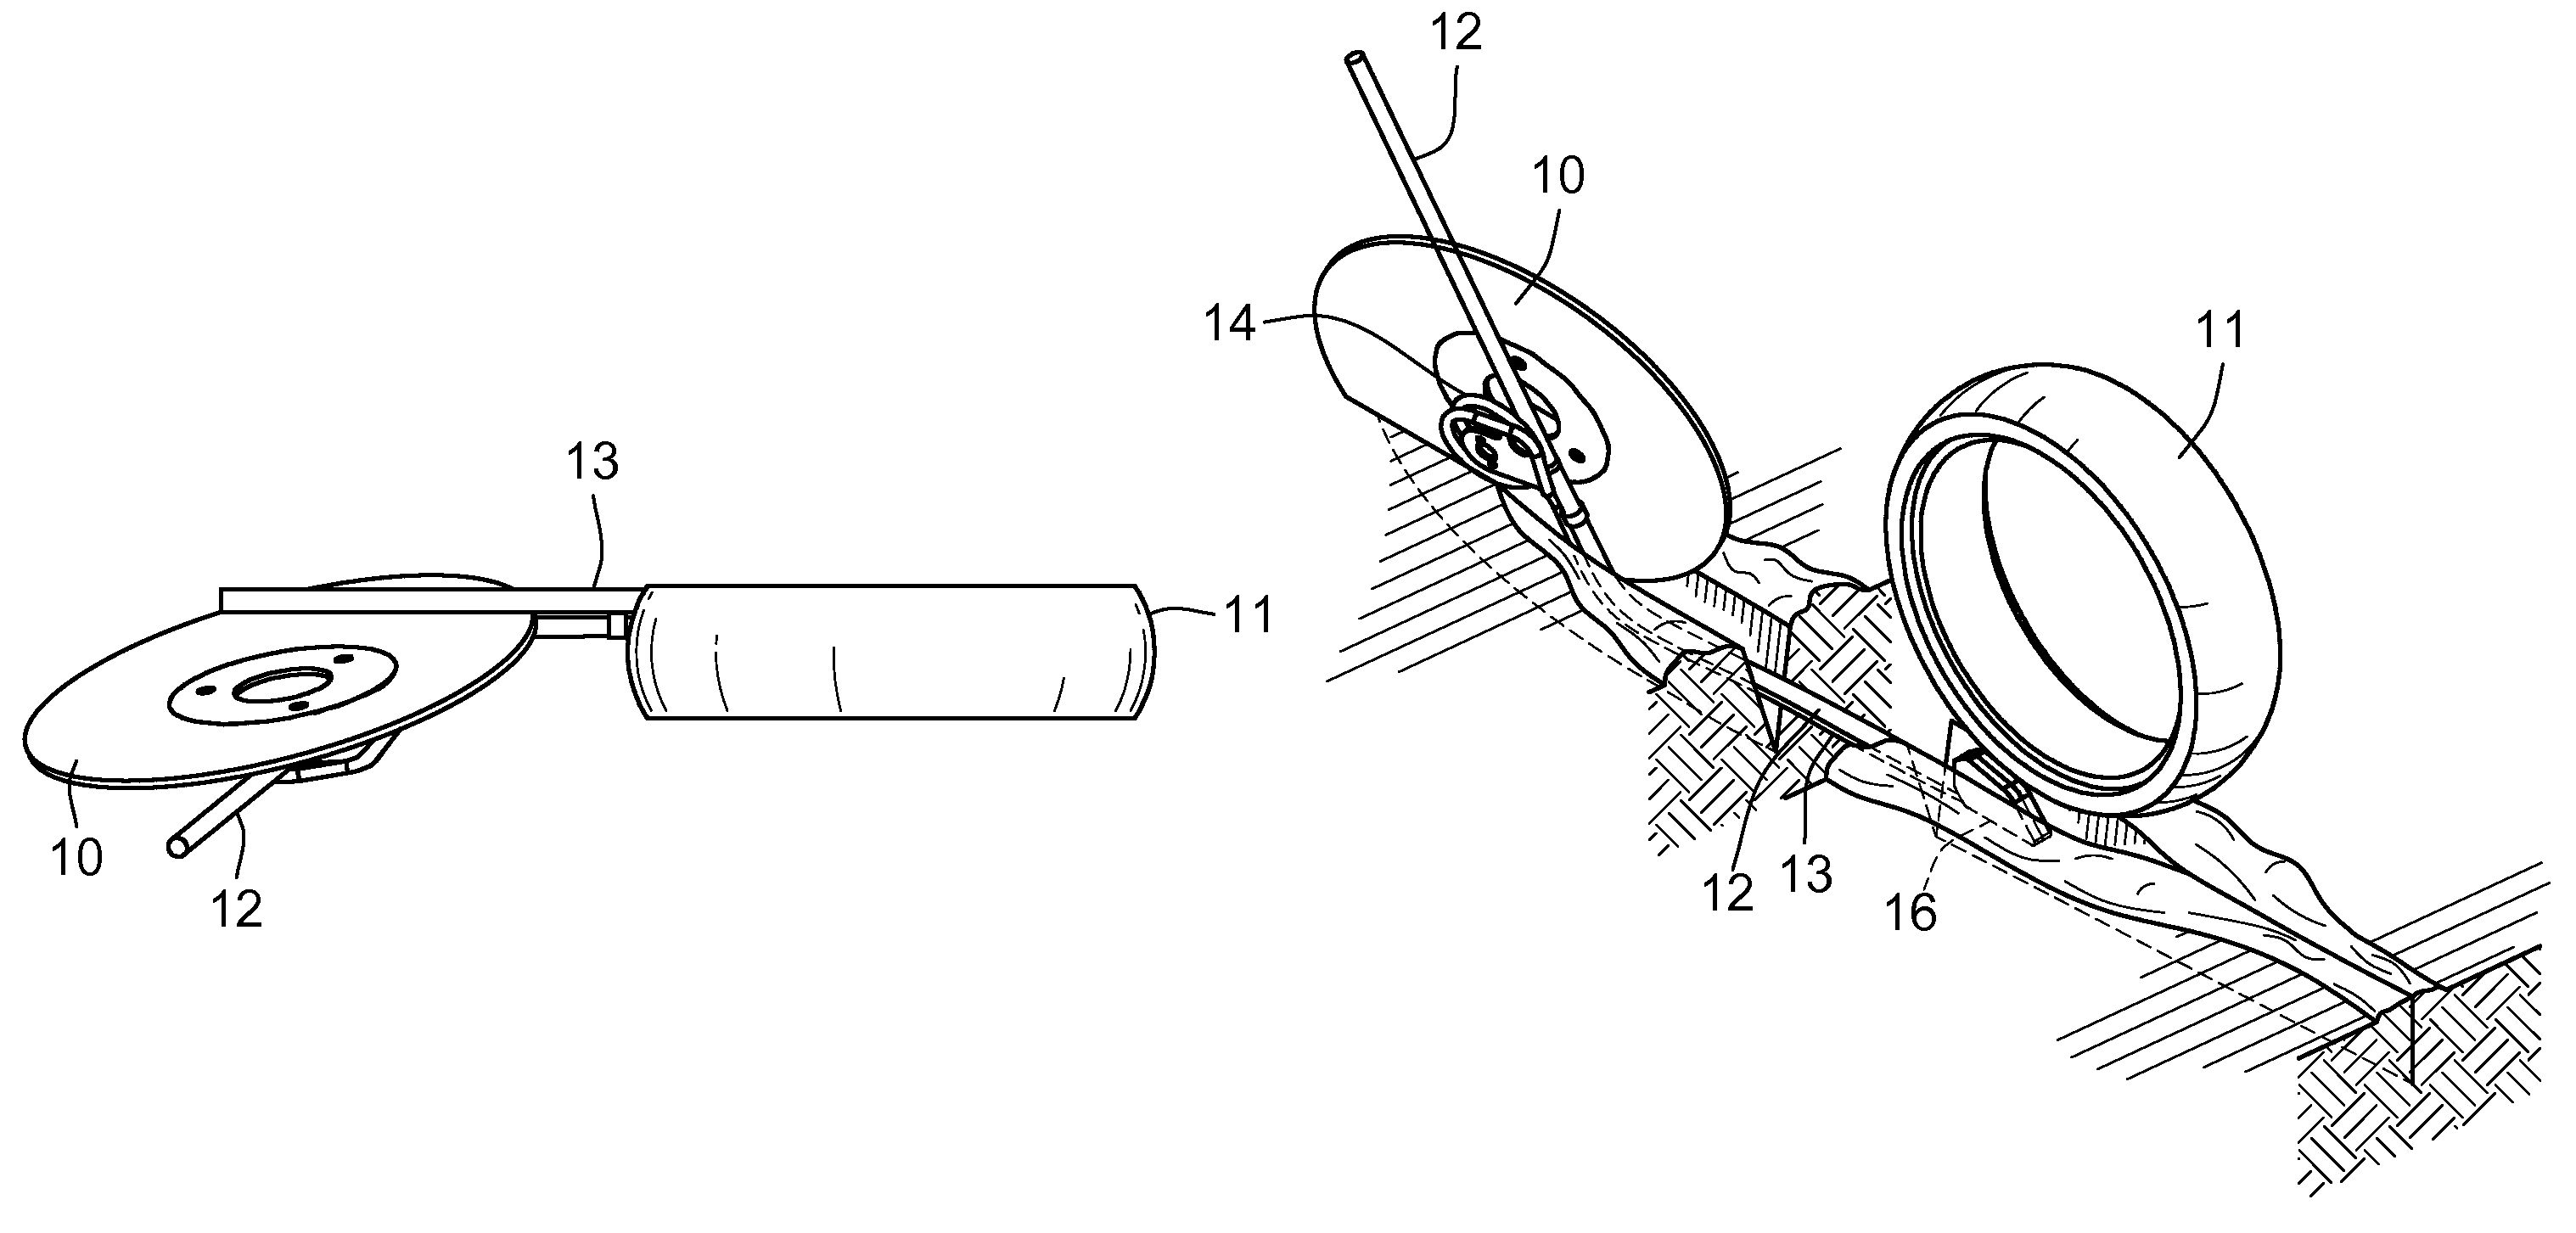 Agricultural implement for delivering ammonia gas to soil